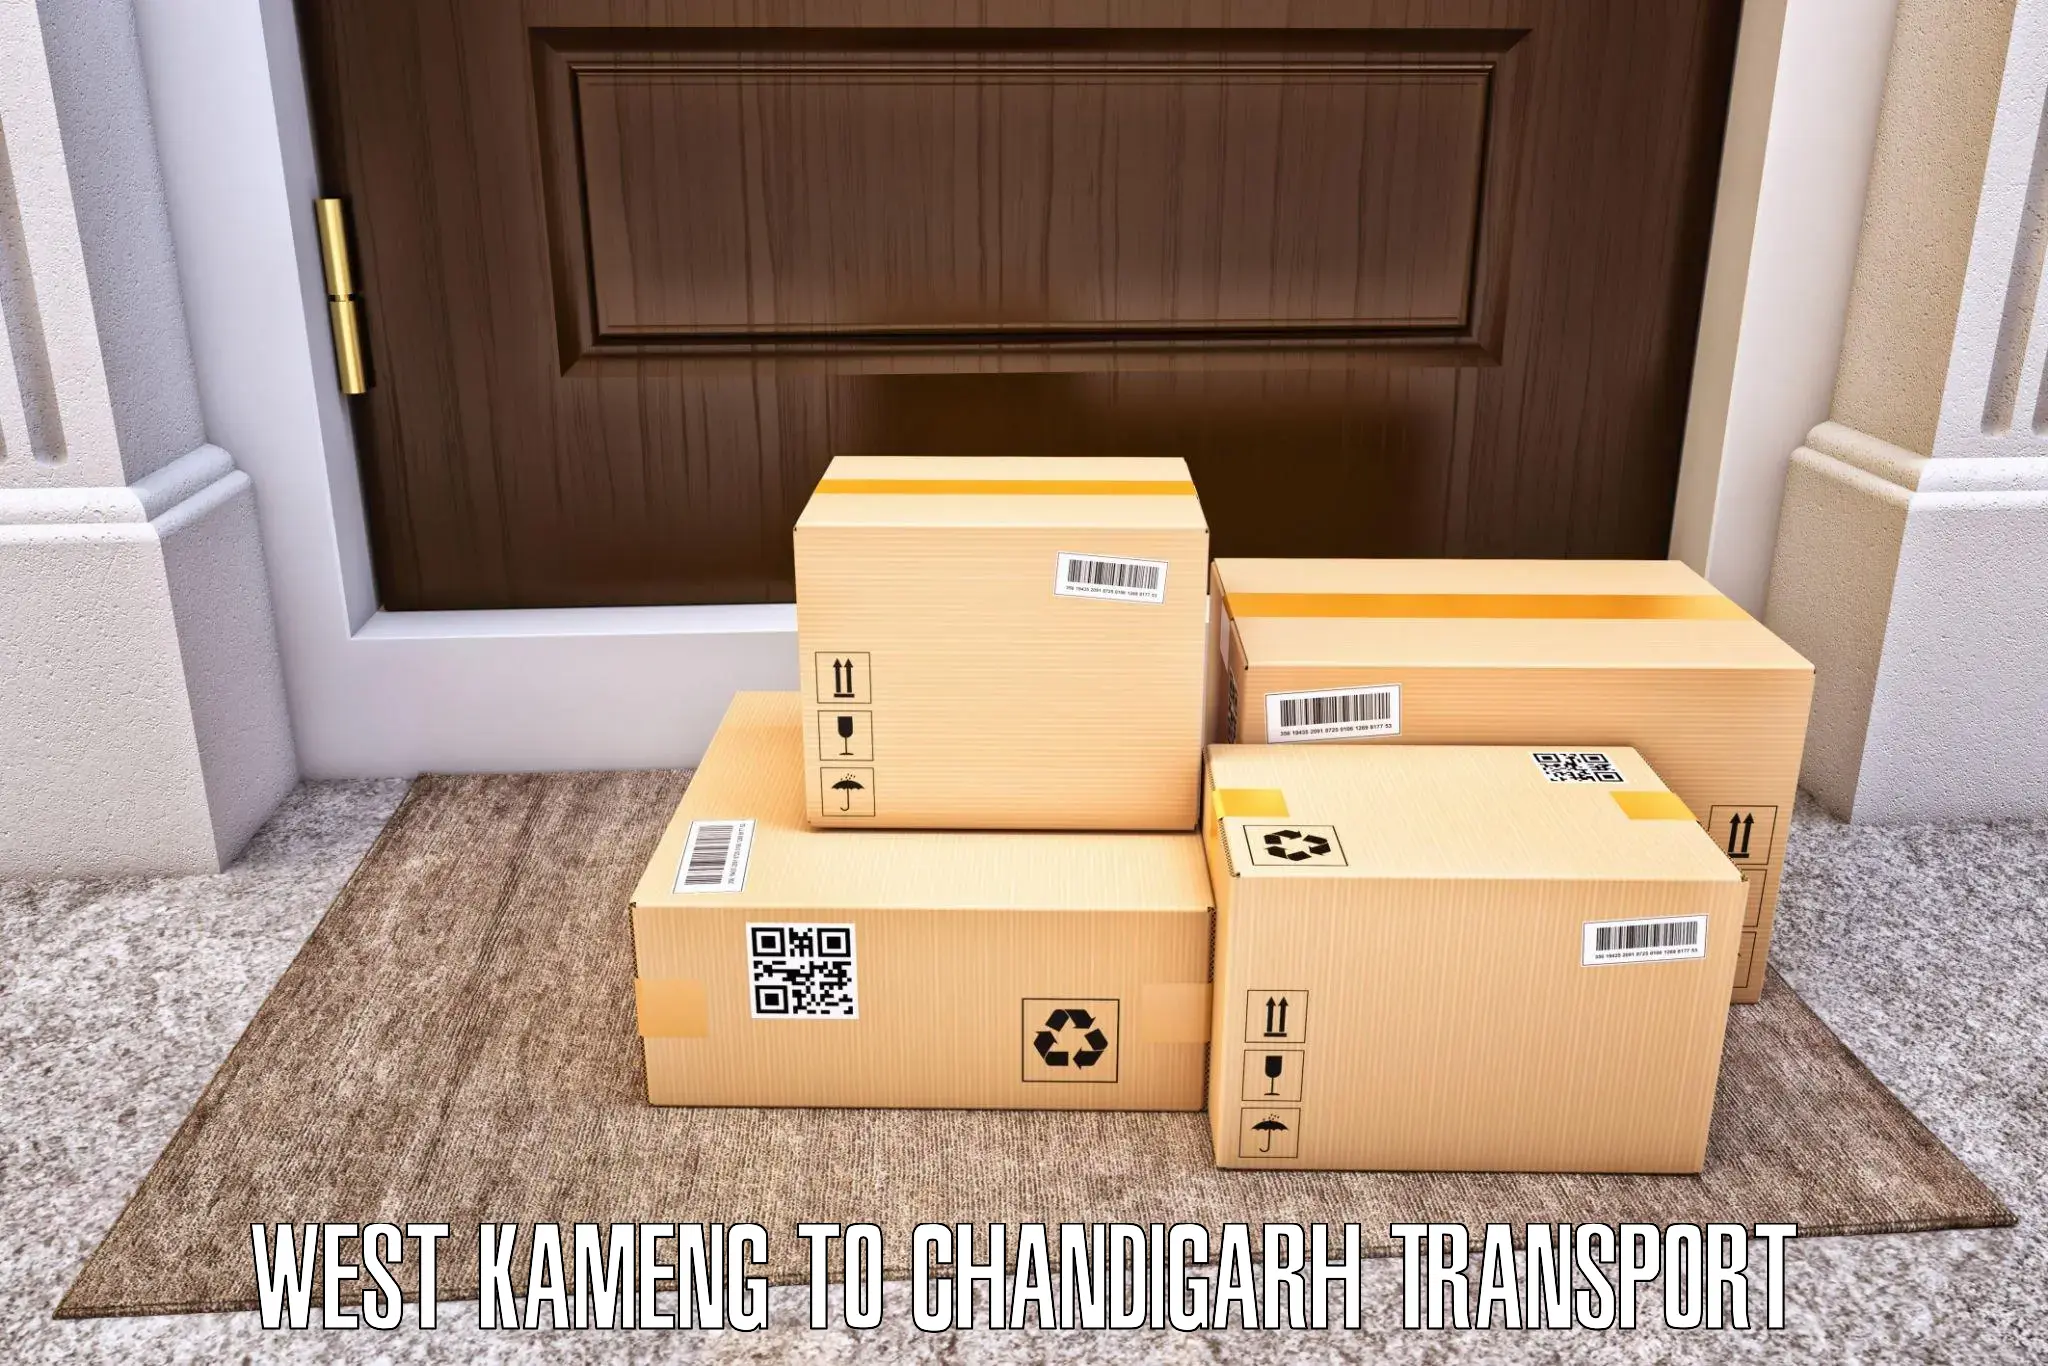 Commercial transport service West Kameng to Chandigarh